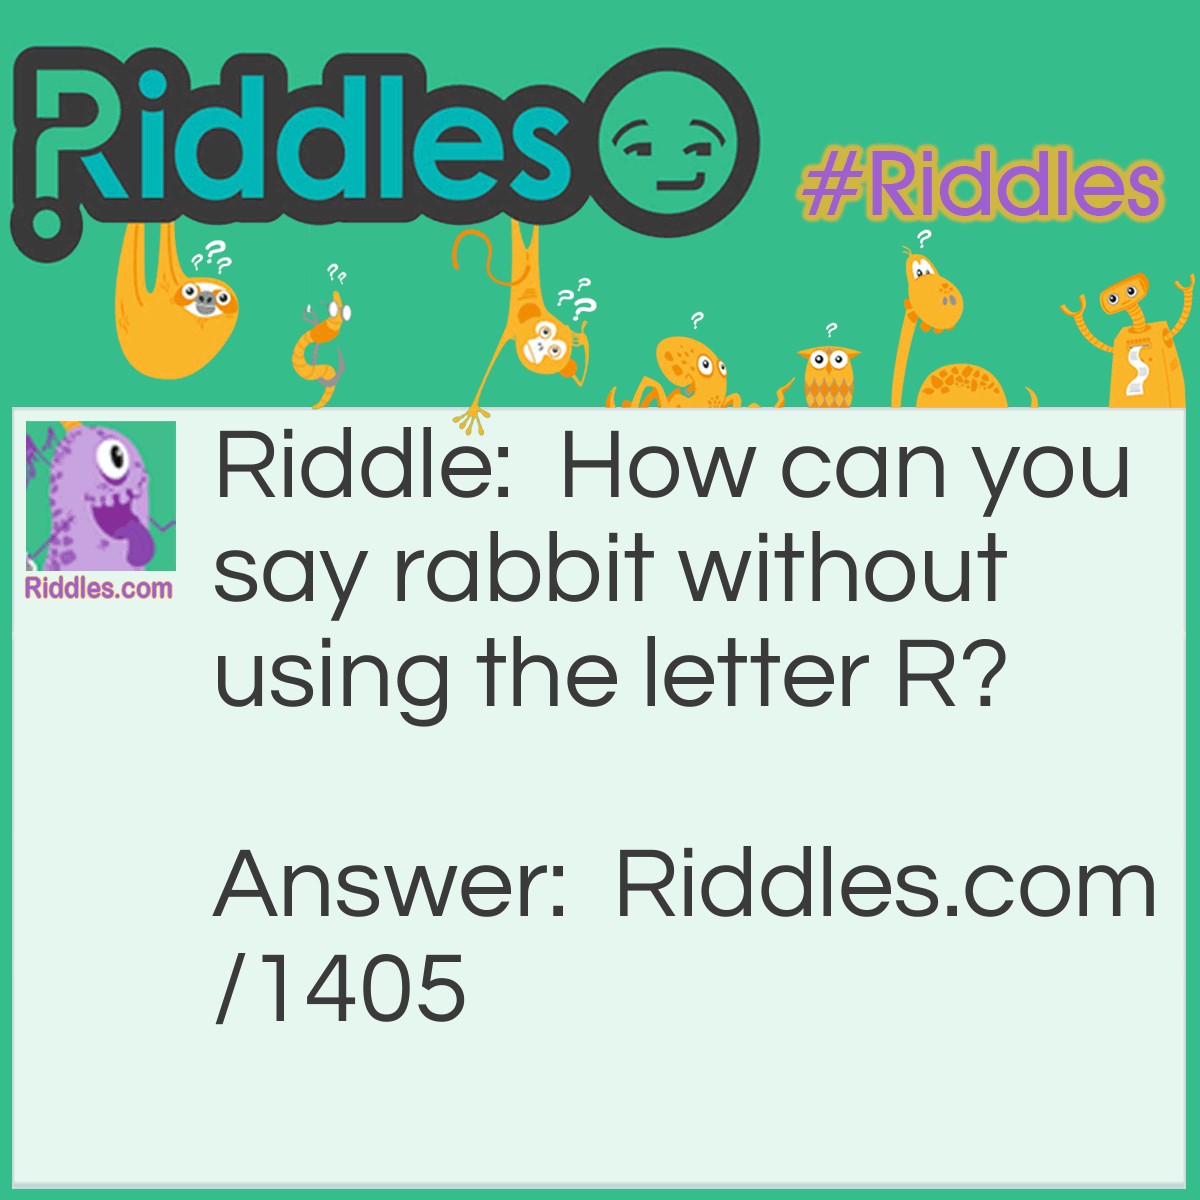 Riddle: How can you say rabbit without using the letter R? Answer: Bunny.